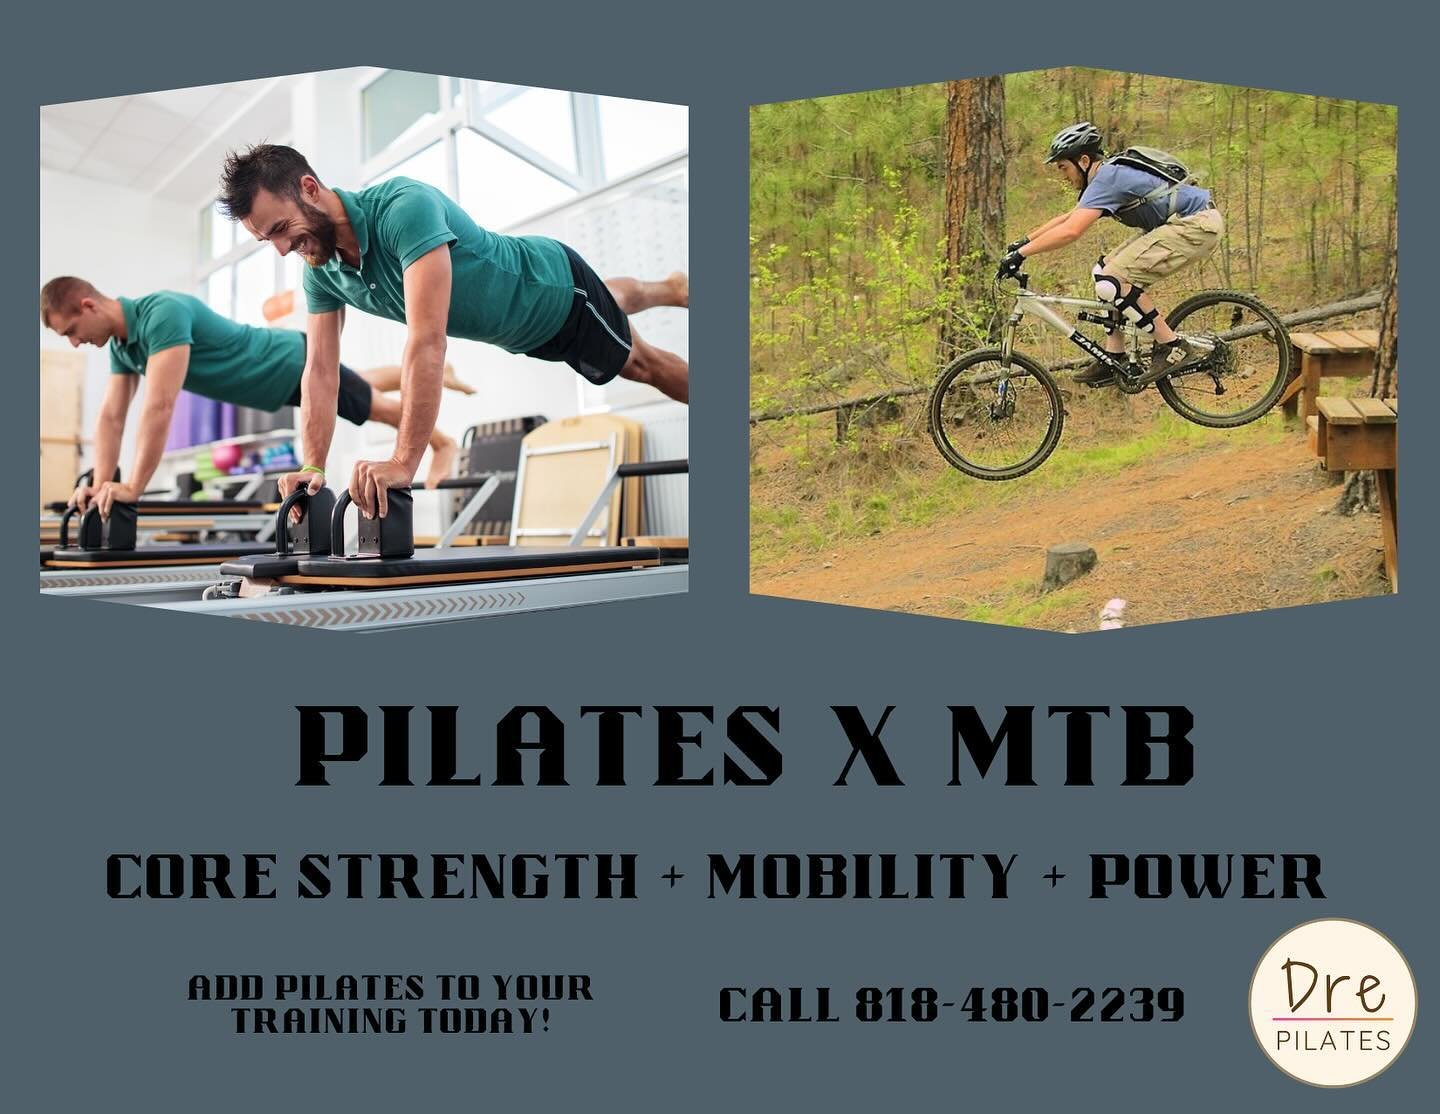 Pilates IS for men. 
Pilates IS for woman. 
Pilates IS for any sport. 

If you can imagine being able to create power in your body ON DEMAND, you are imagining what Pilates as part of your training could offer. 

Comment, call, or text for info on ho